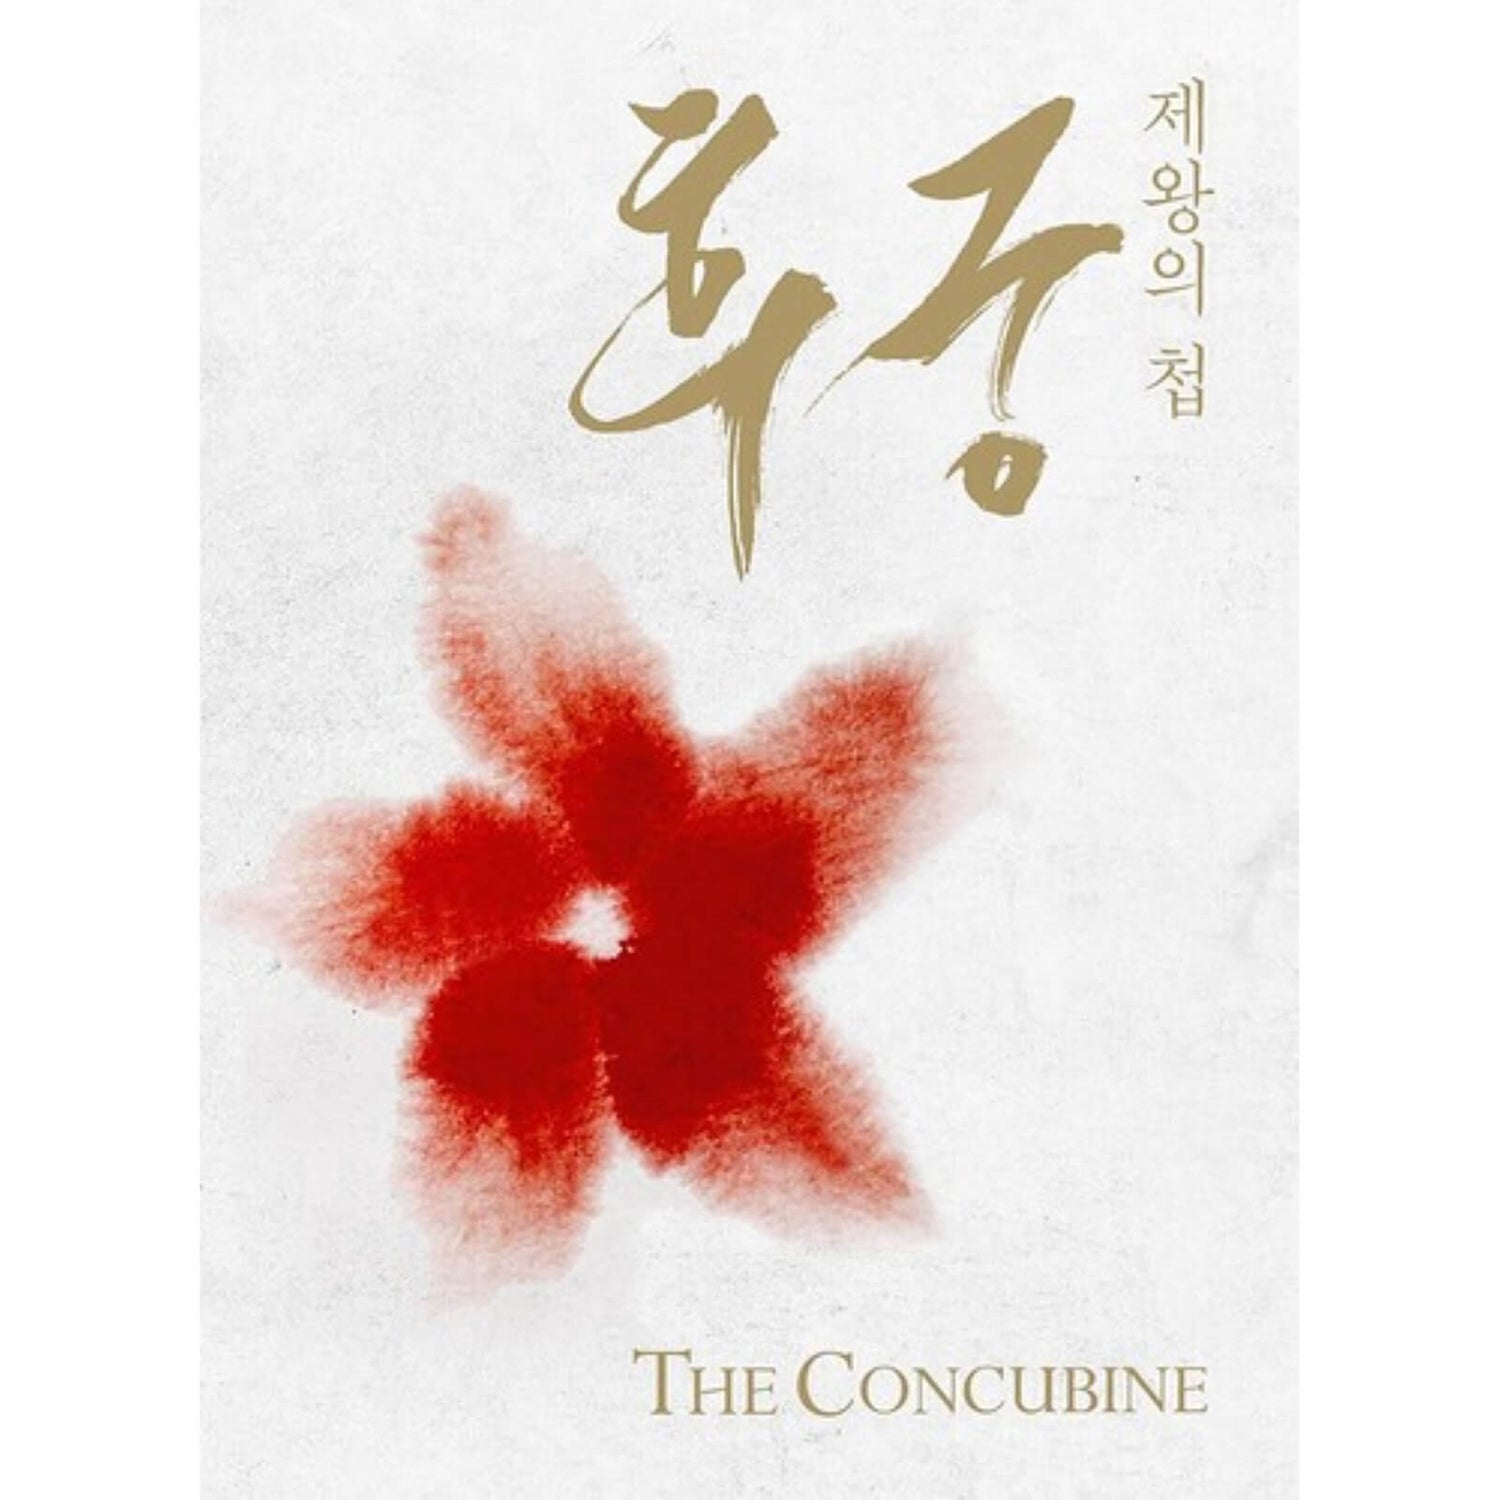 The Concubine (Includes DVD) (US Import)